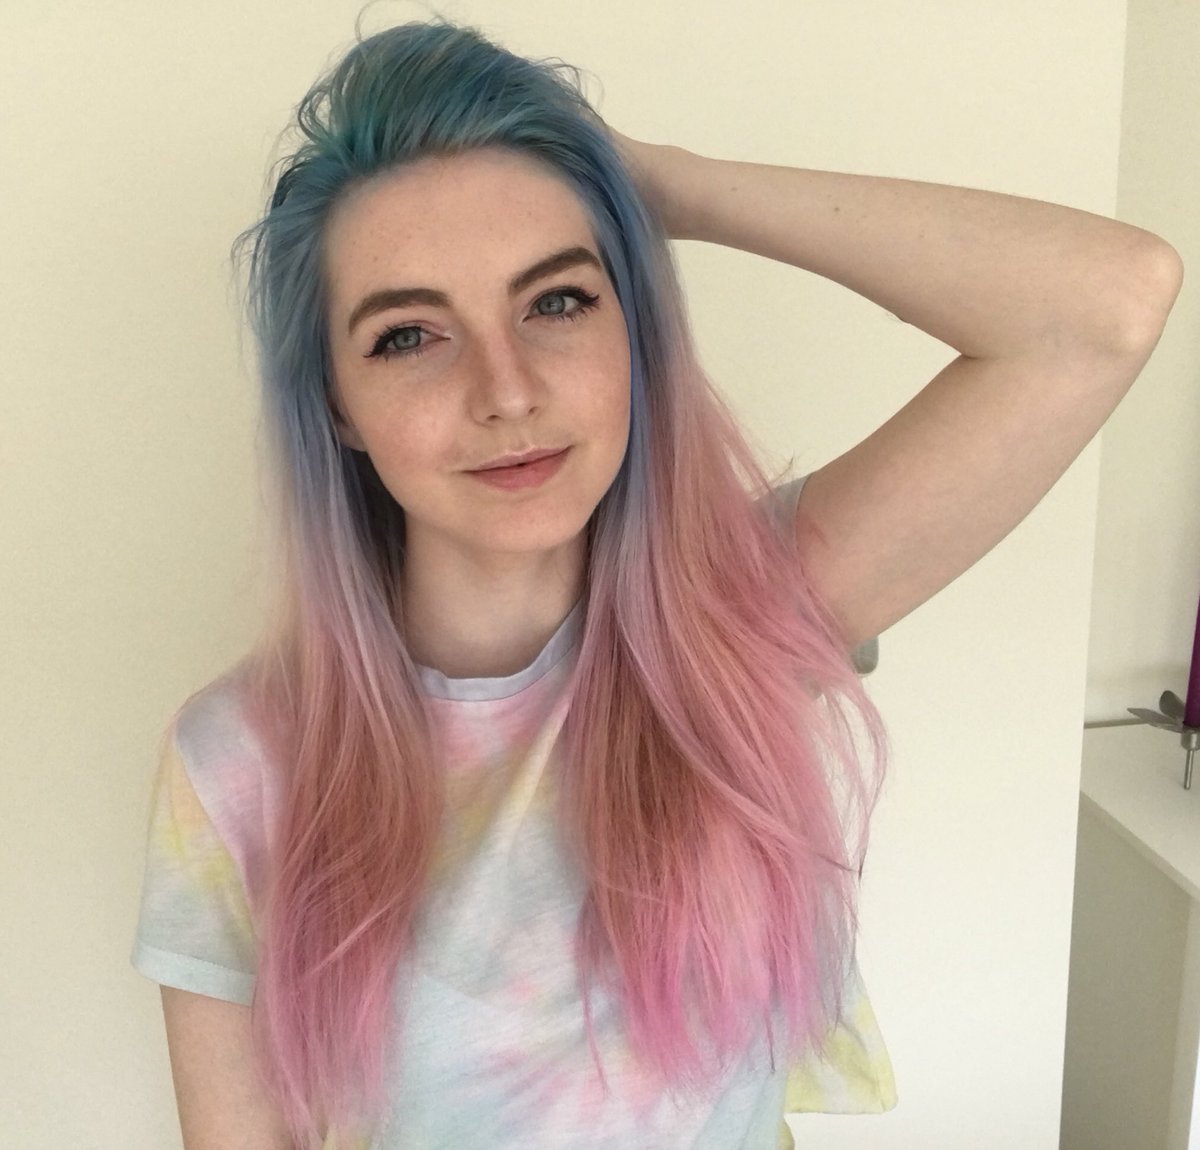 51 Sexy LDShadowLady Boobs Pictures That Will Fill Your Heart With Triumphant Satisfaction 5